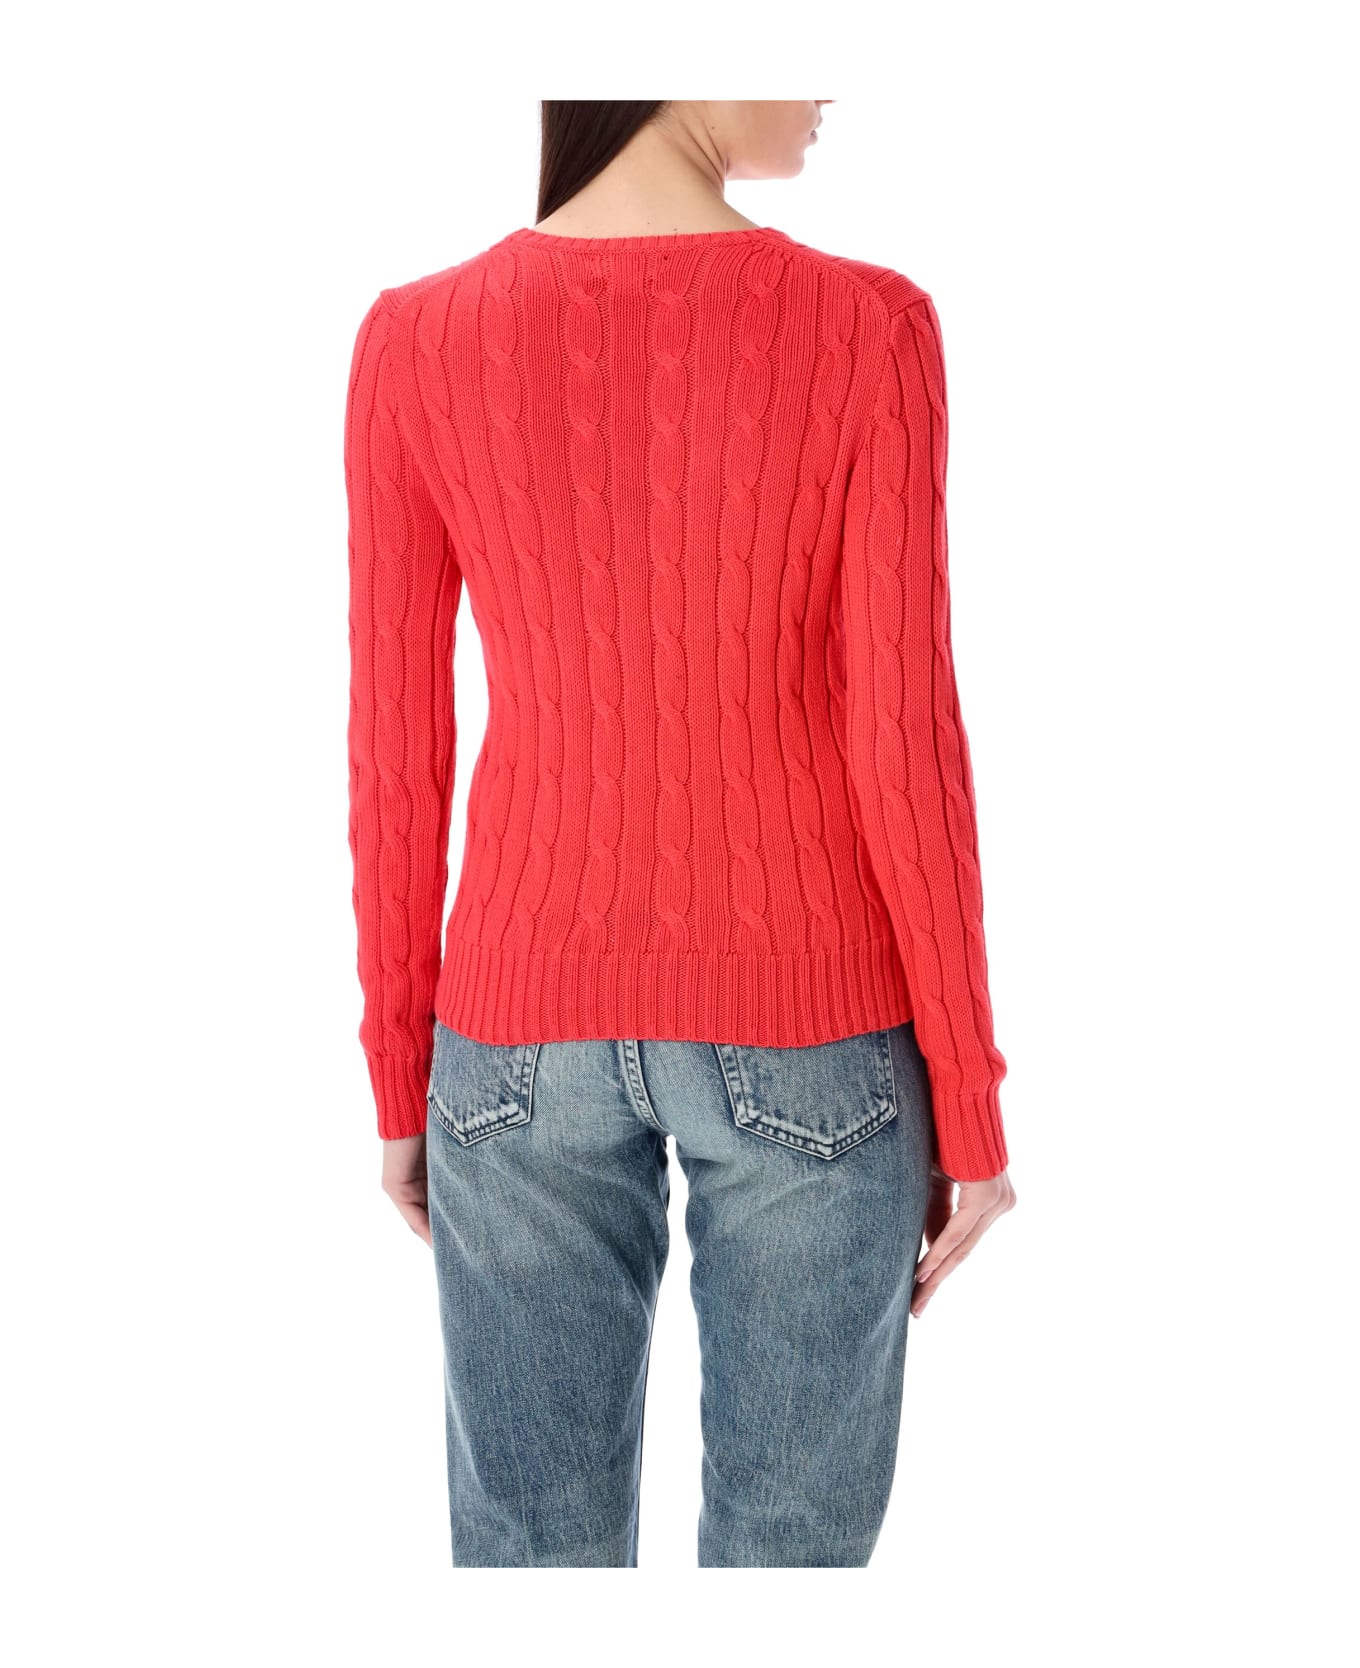 Polo Ralph Lauren Cable-knit Cotton Crewneck Sweater - IBISCUS RED